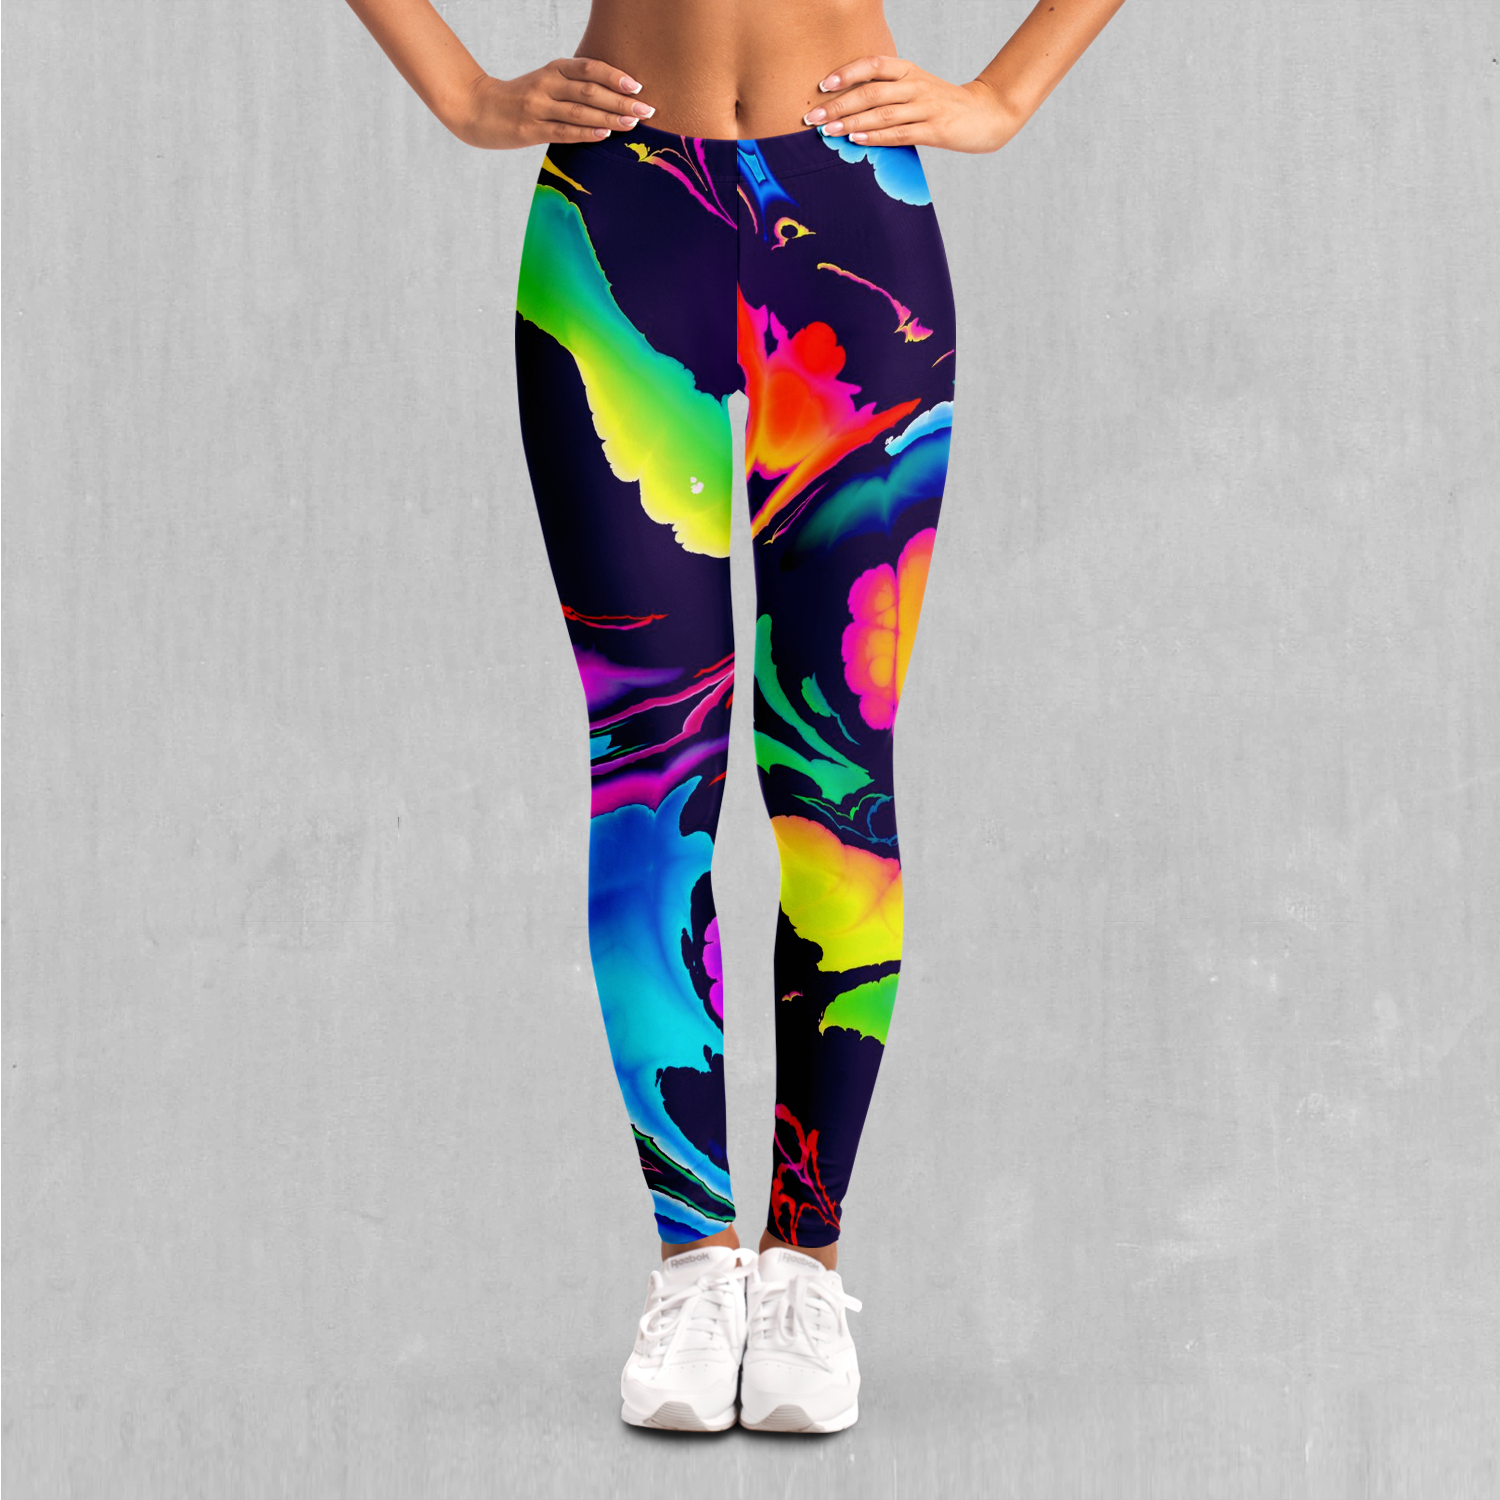 Buy Galaxy Leggings Online, Cheap Womens Rave Clothes, NuLights